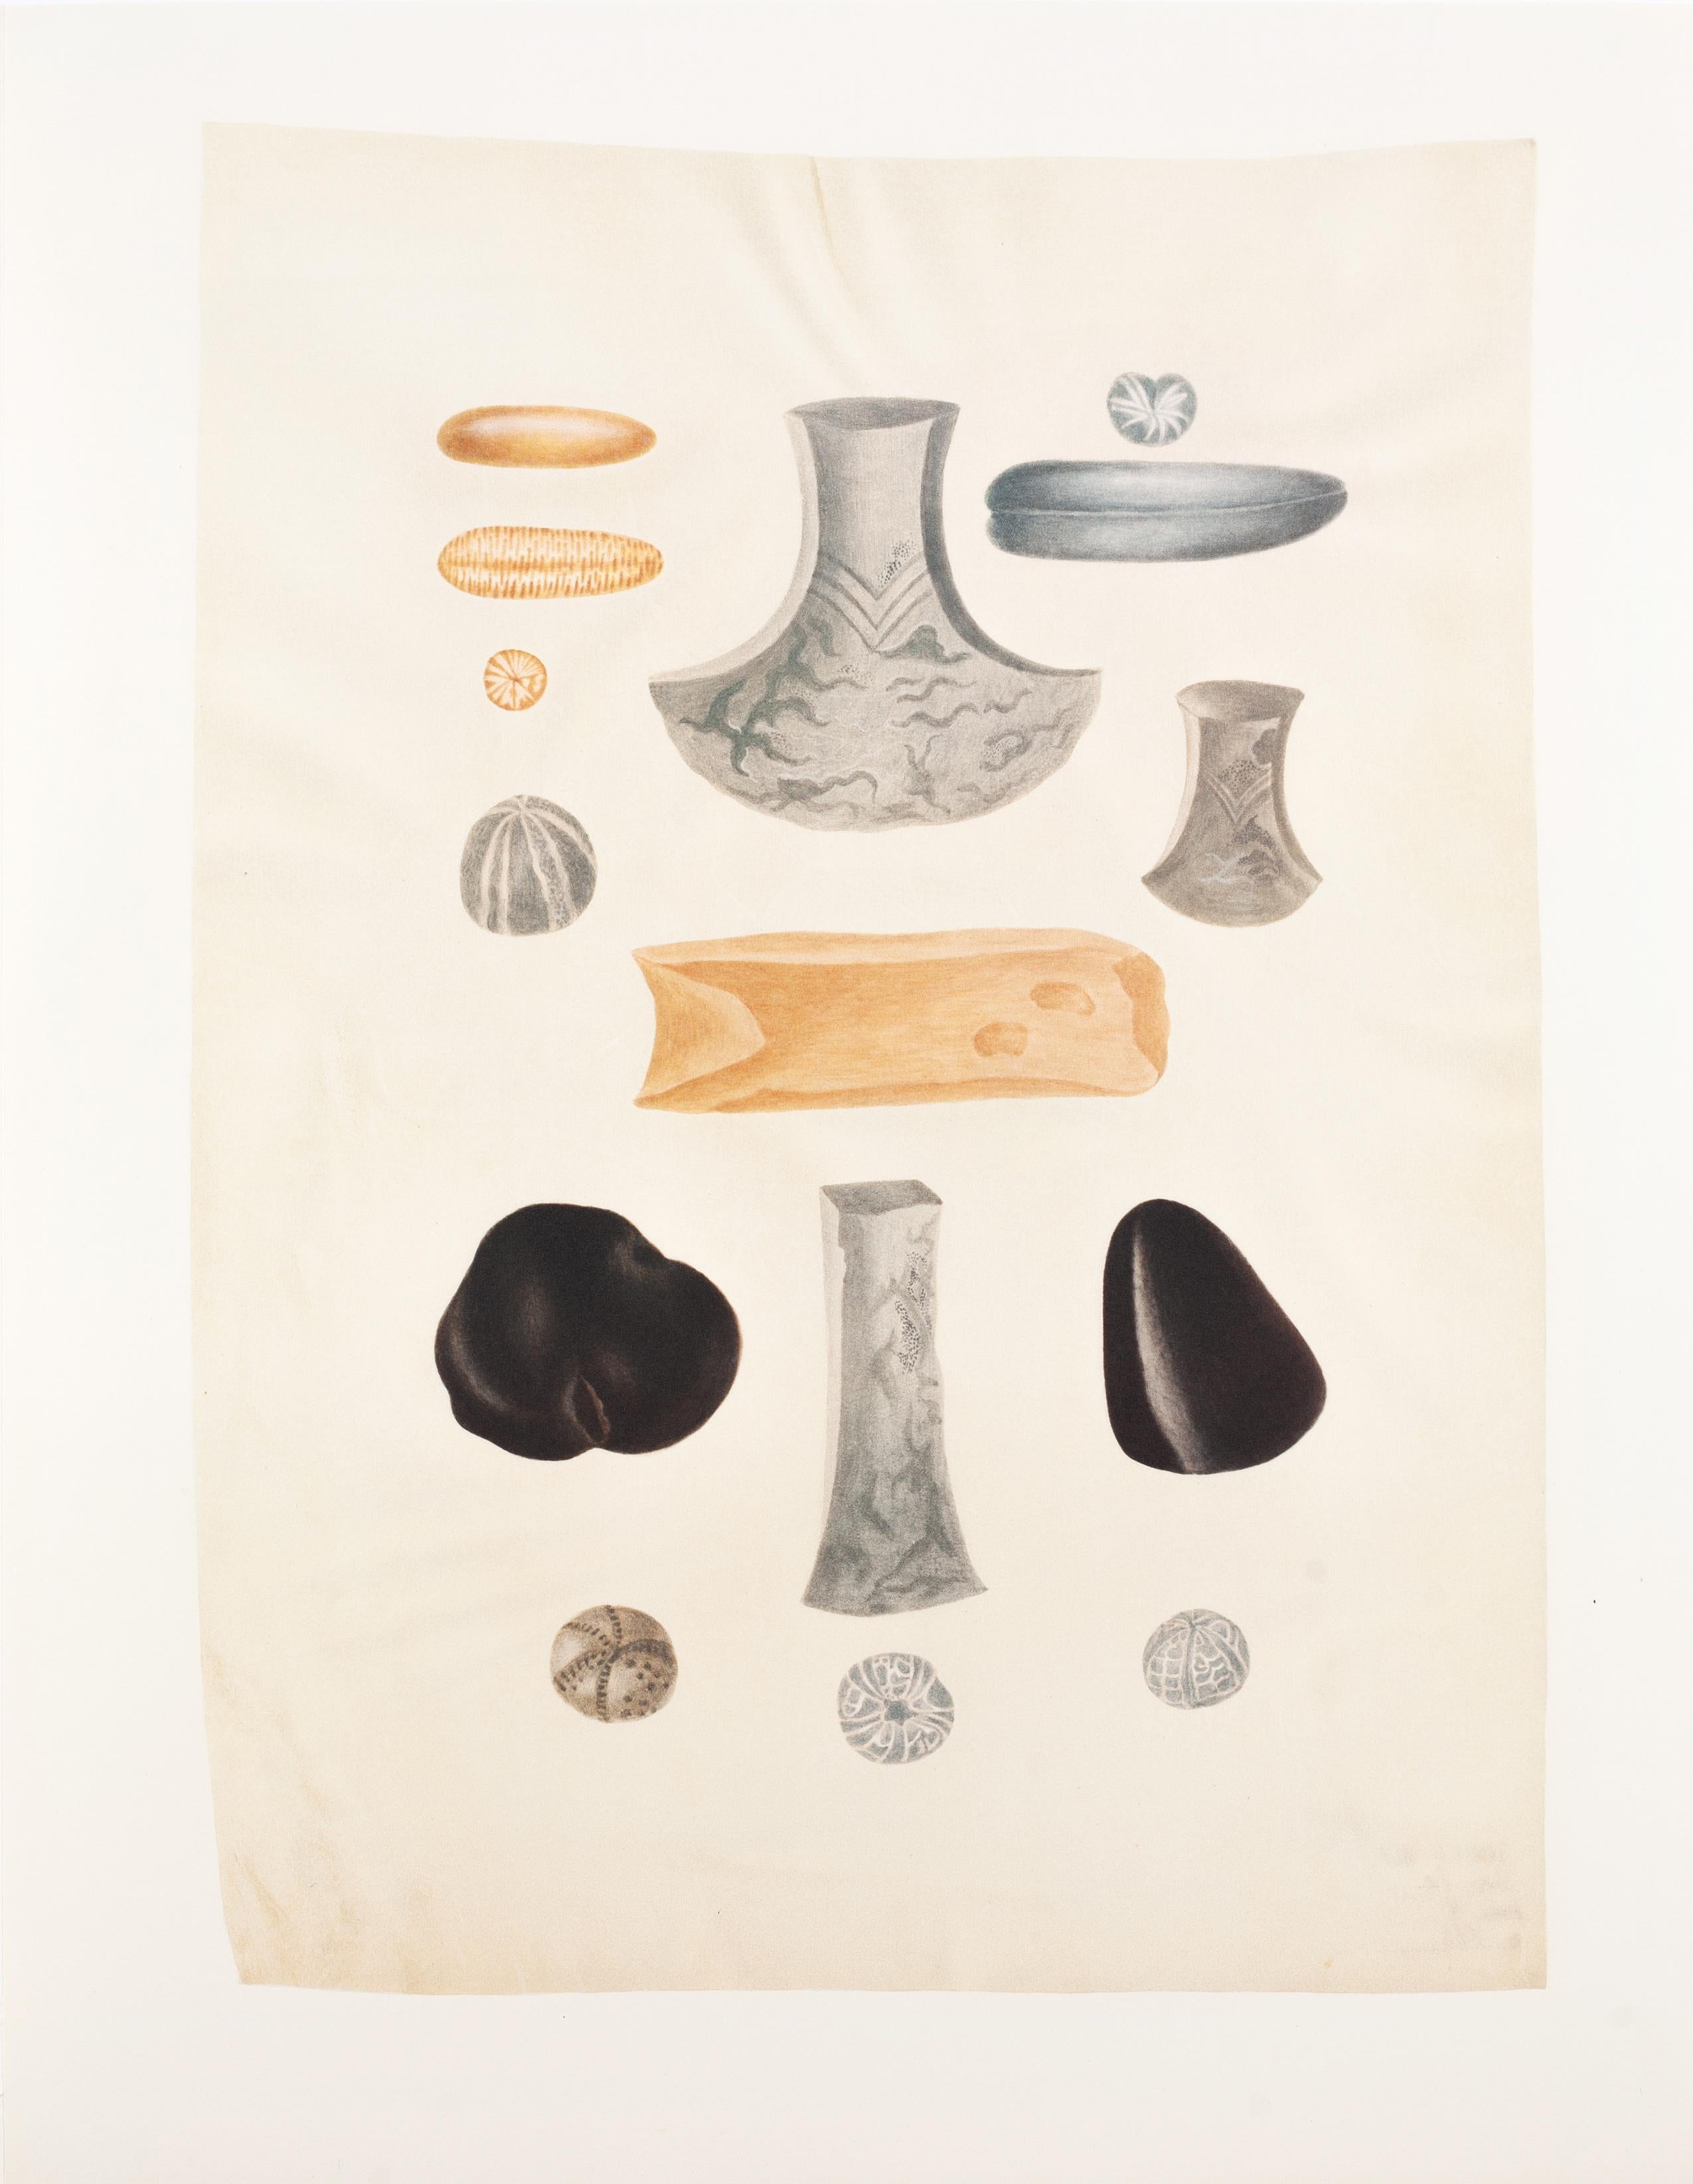 21. Fingerstones, fossil blemnites, Axes of nephrite, flint & metal, Fossilized